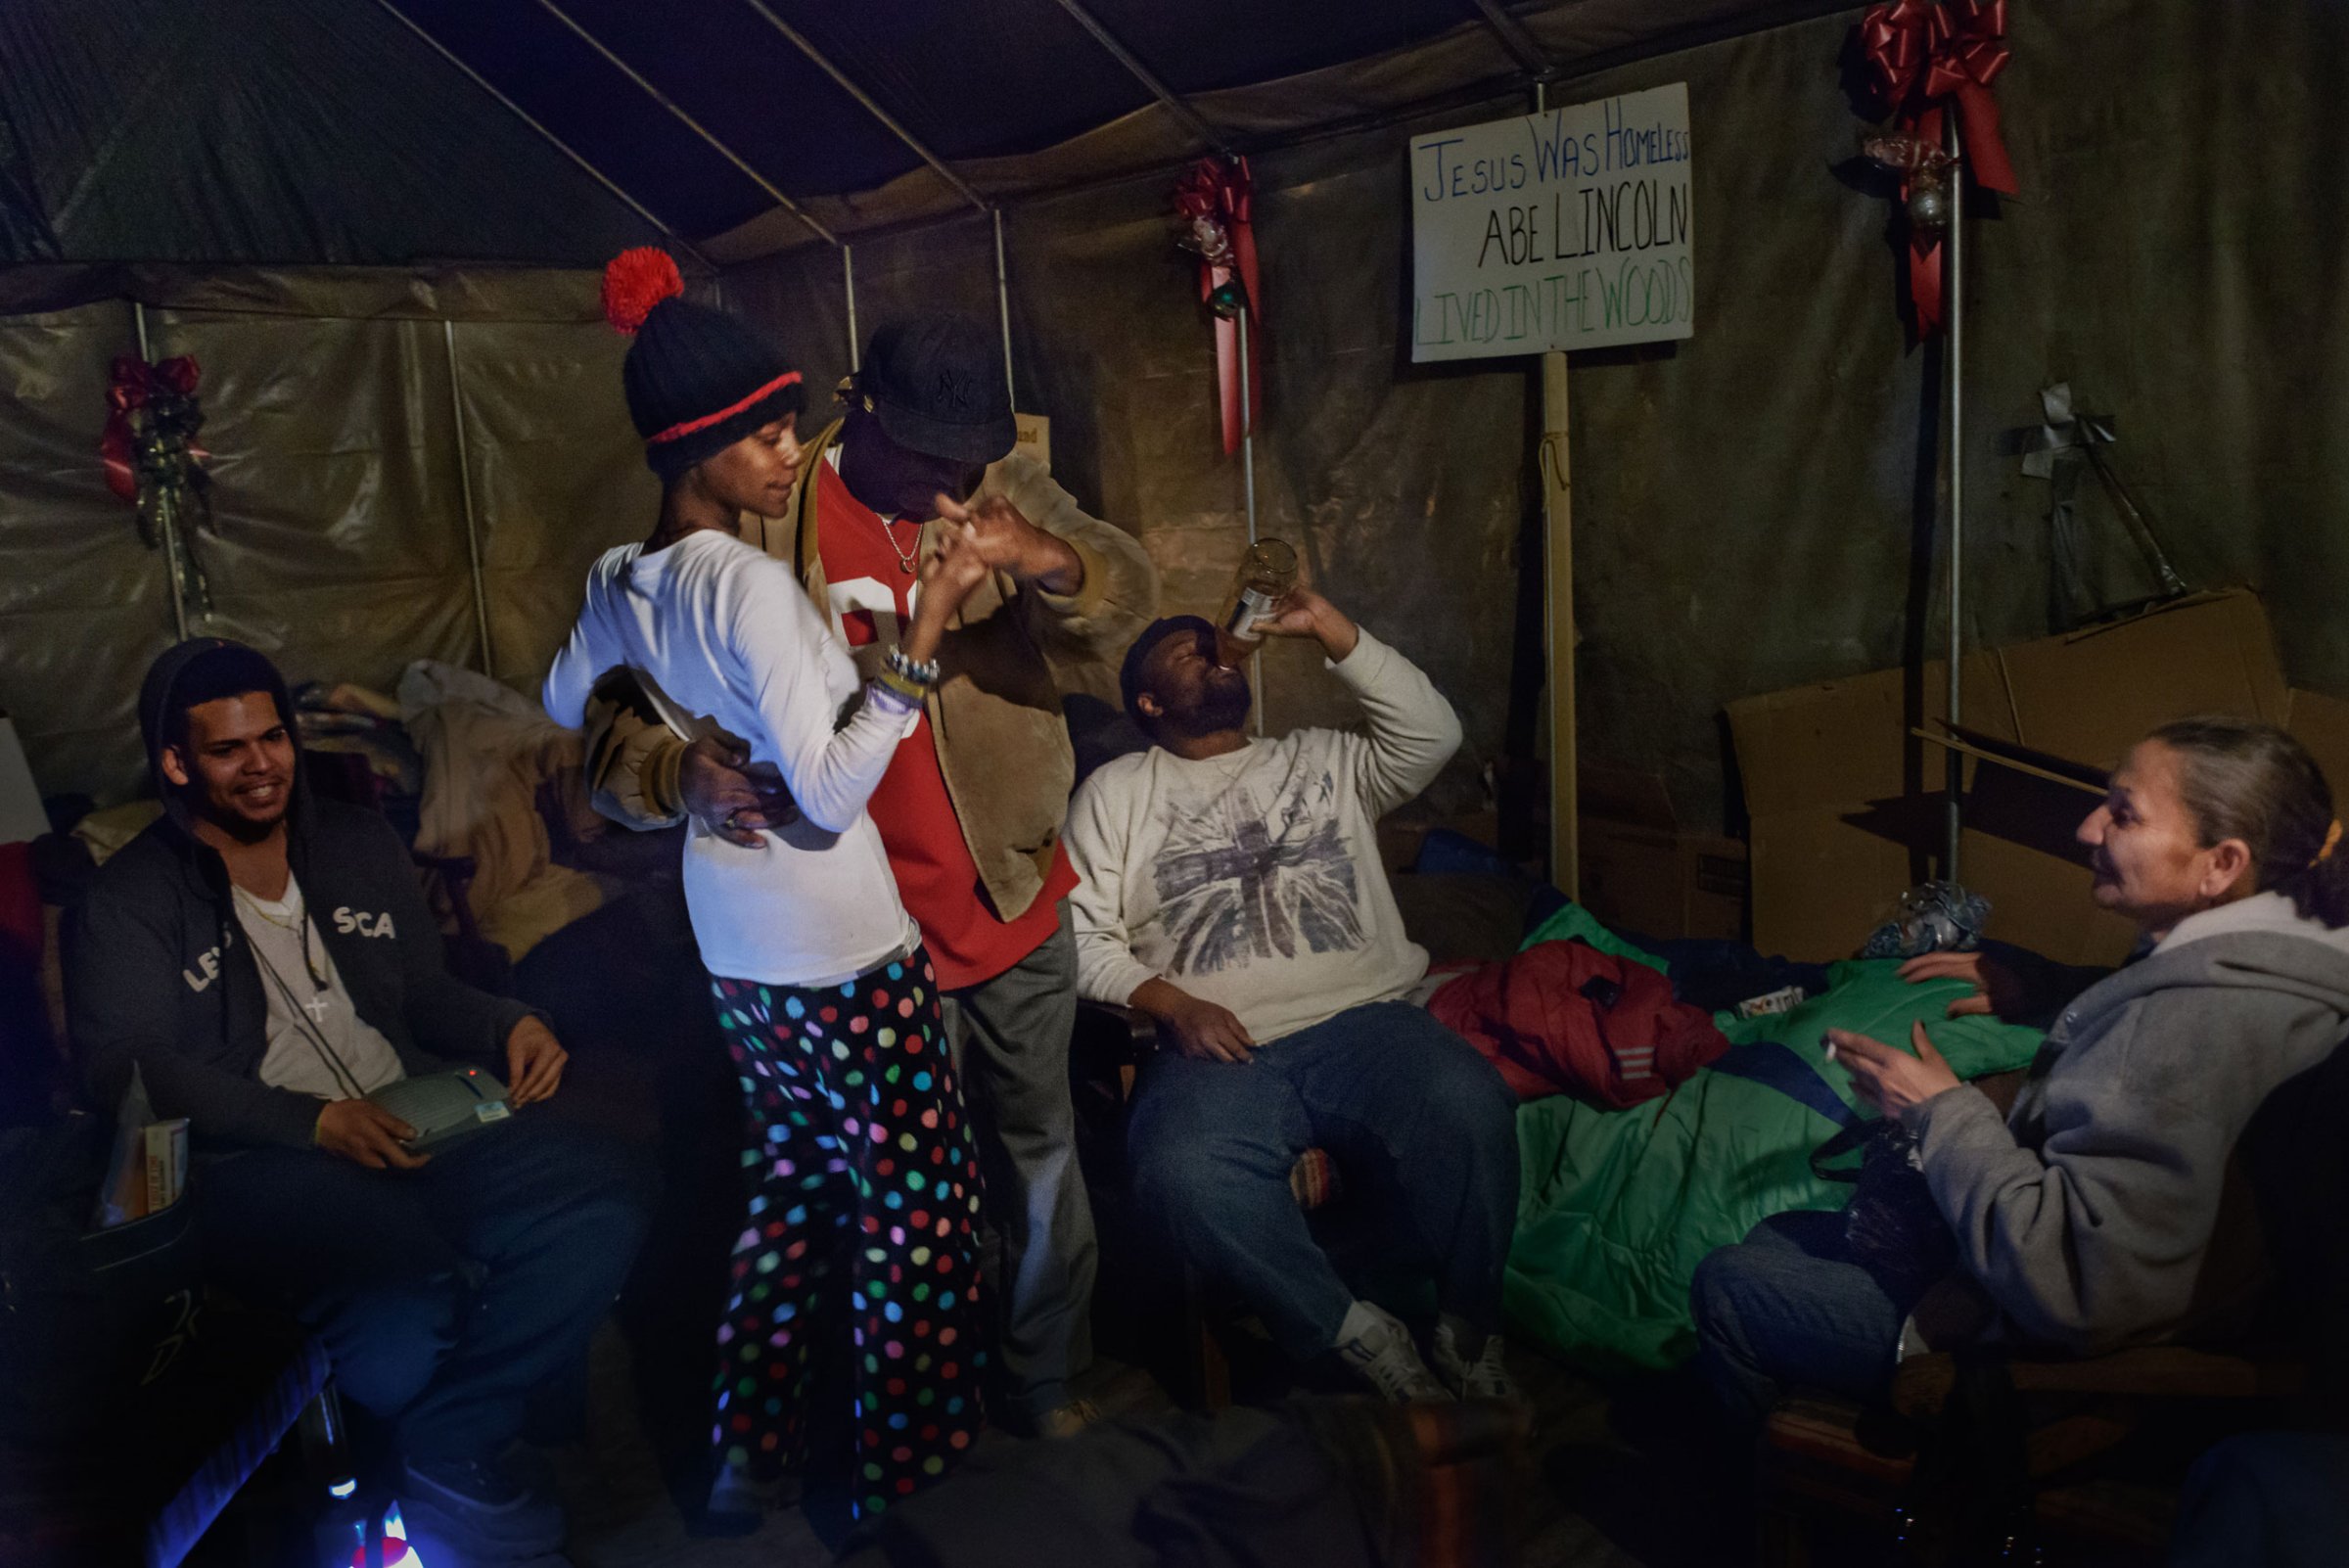 8 March  2014 - Tent City, Lakewood, New Jersey - Inside Tent City's chapel, "Uncle Mike"  dances salsa with Eve.